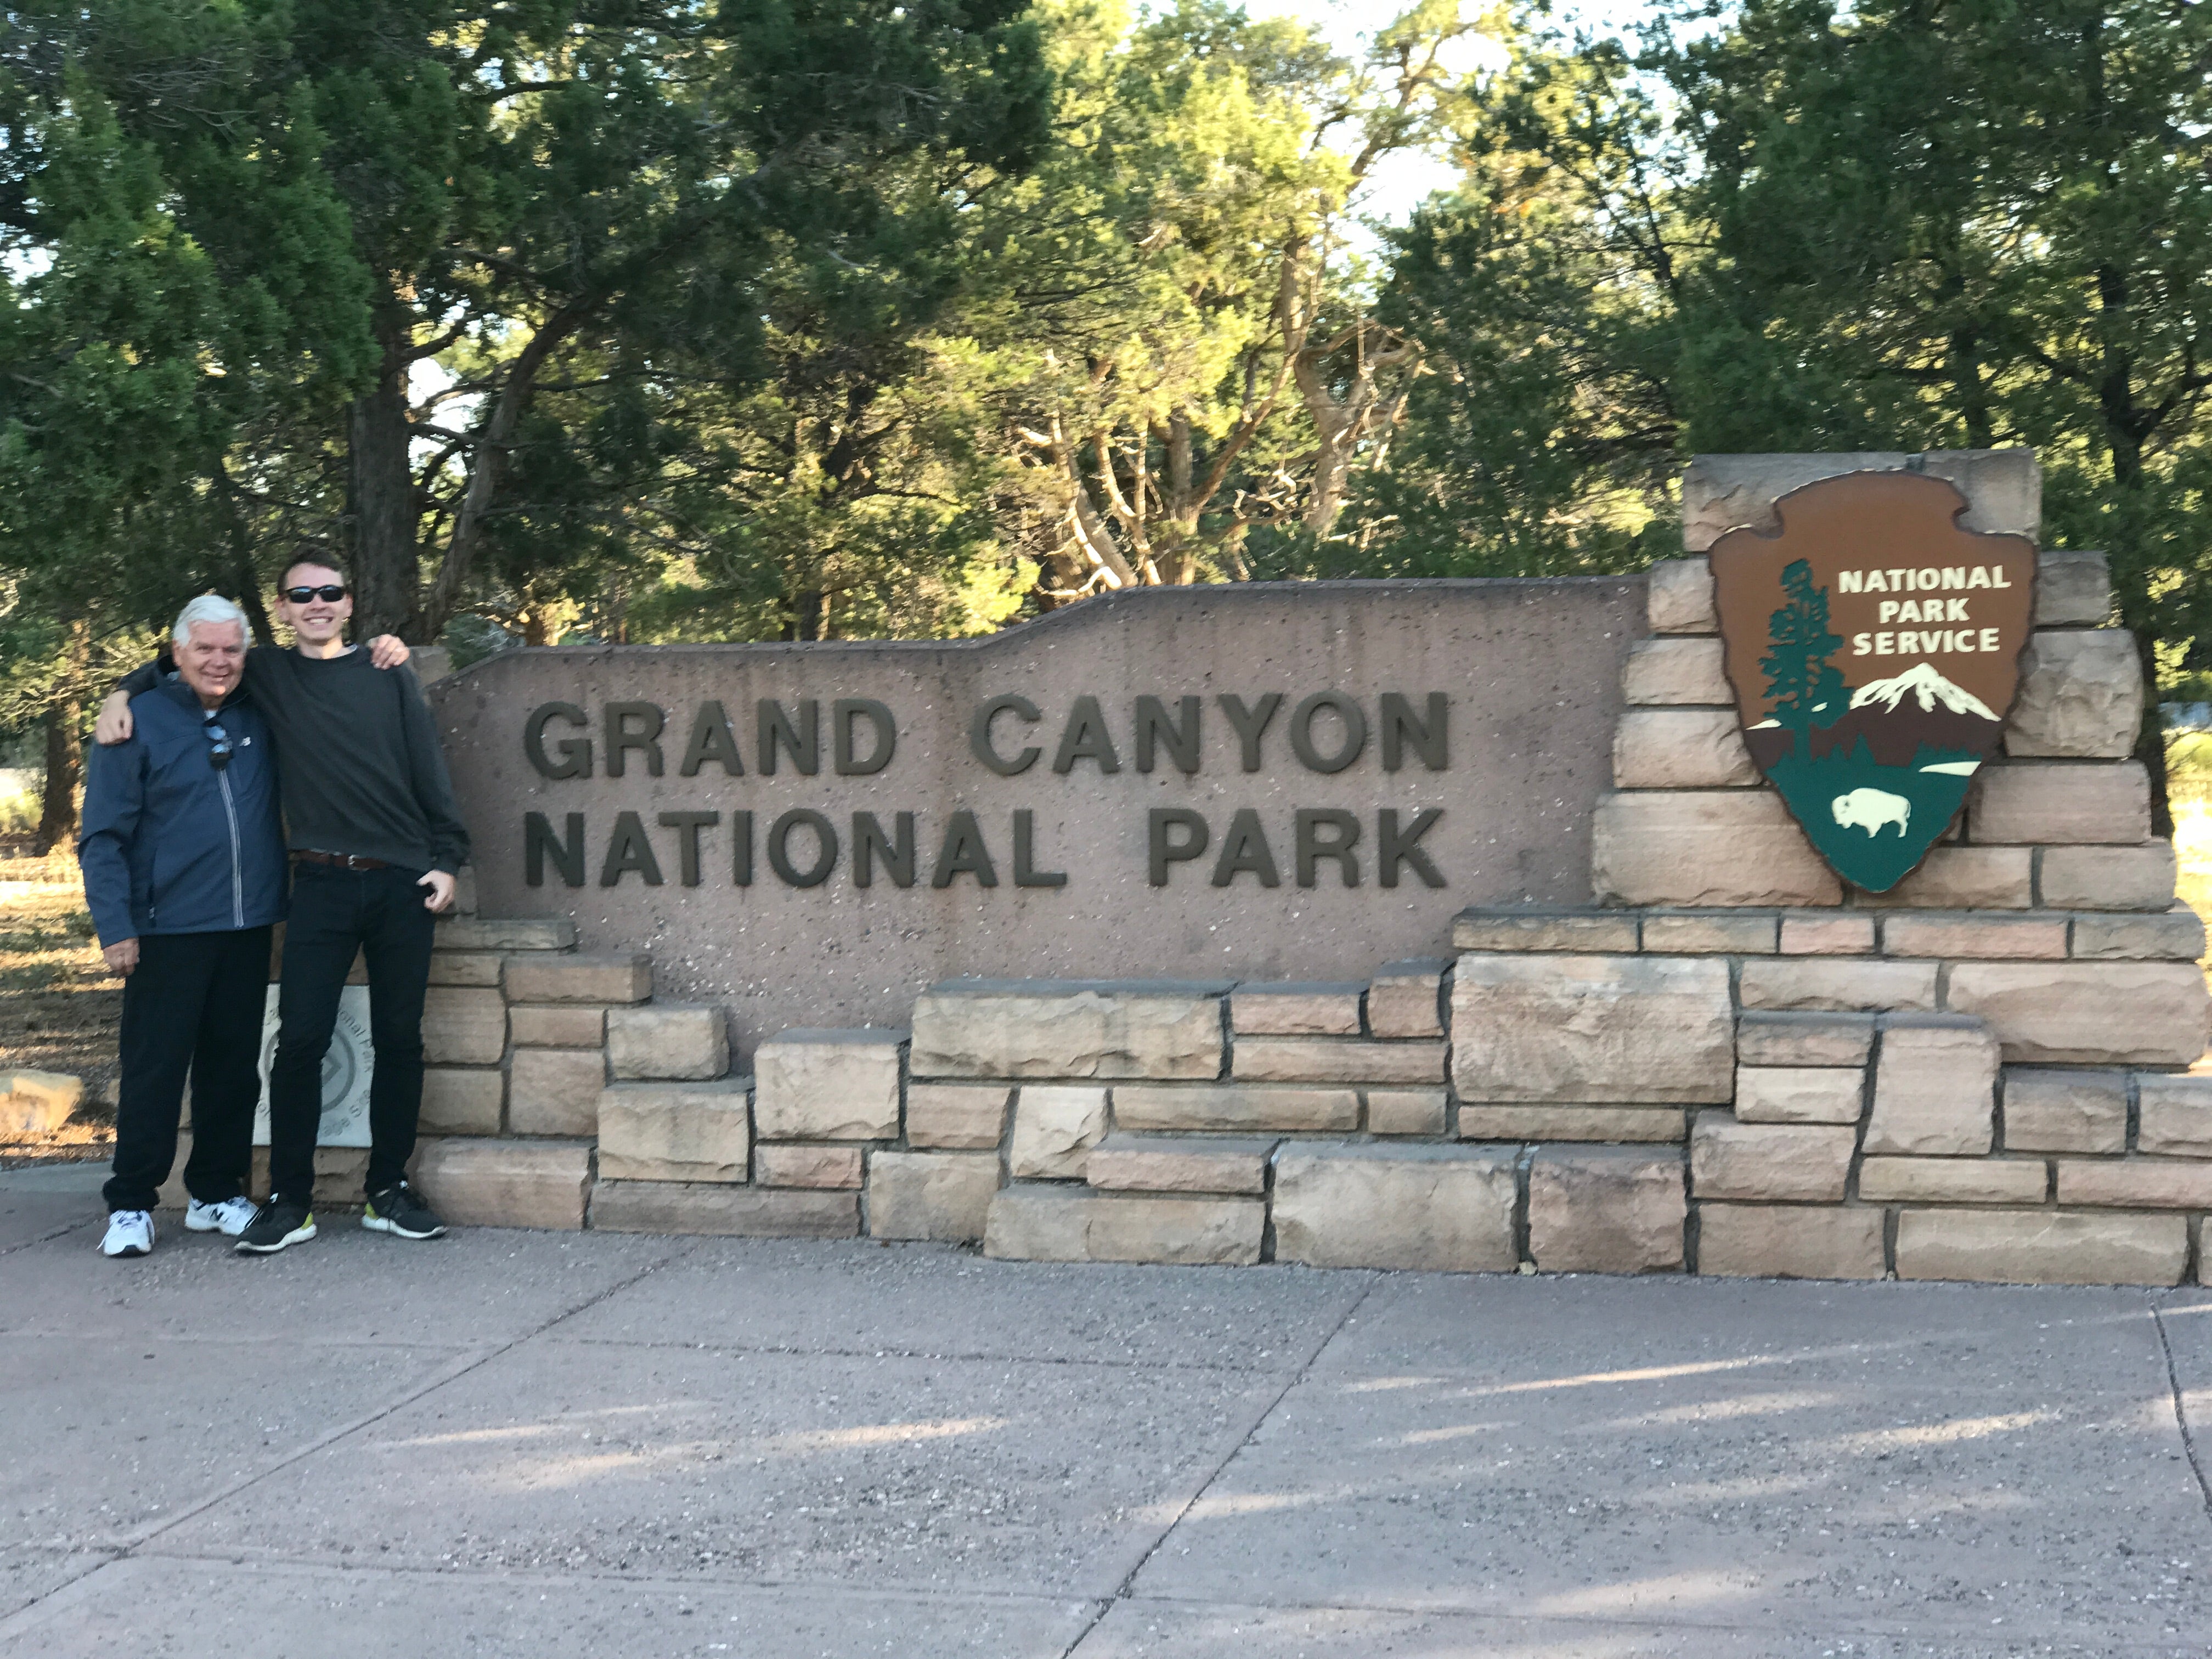 Just 4 quick miles to the canyon entrance